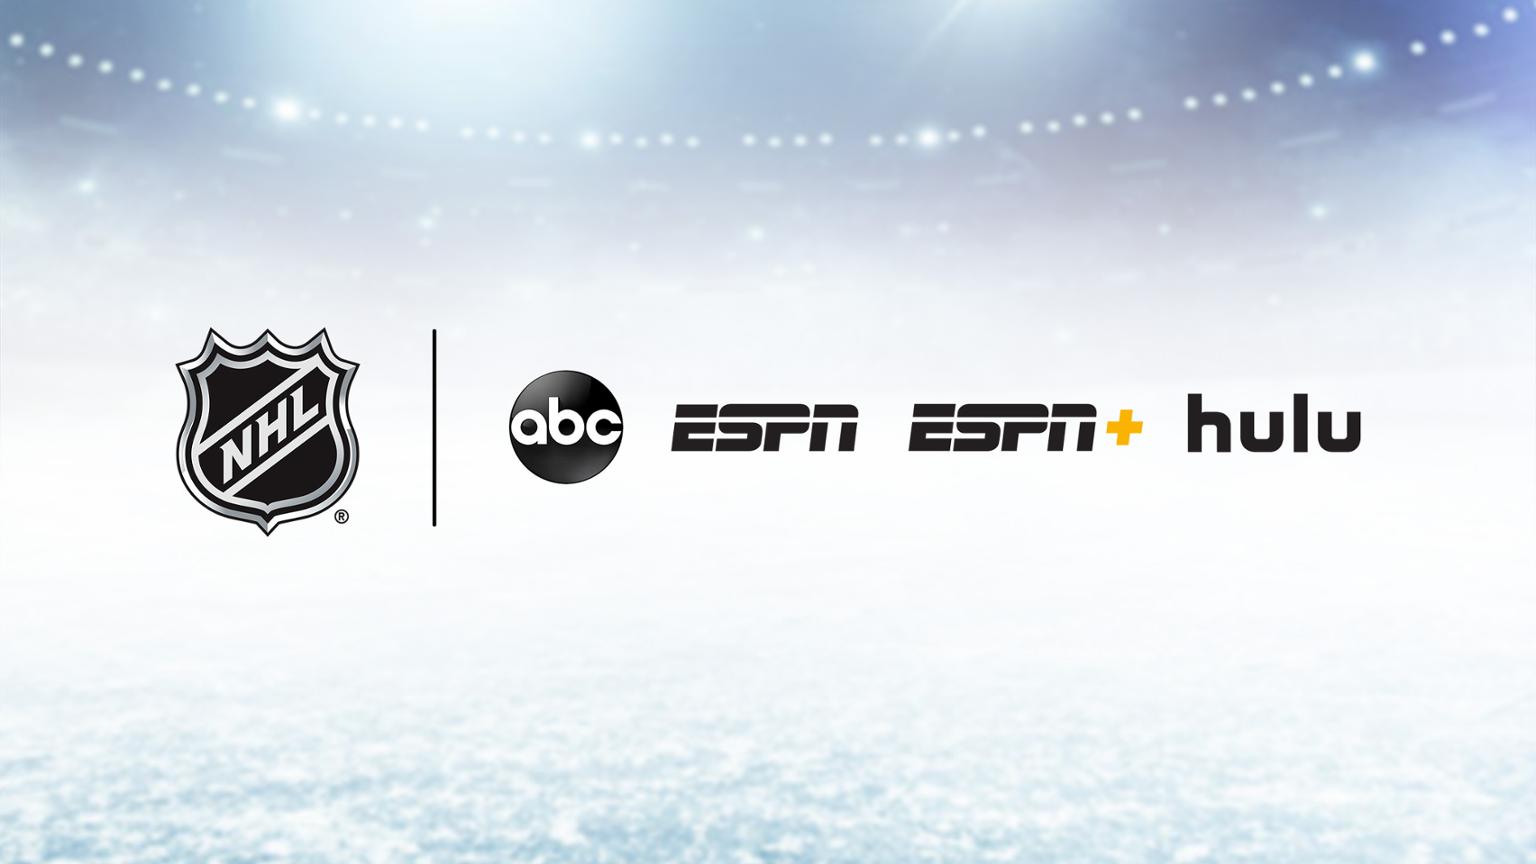 Hockey returns to ESPN with new deal that includes streaming